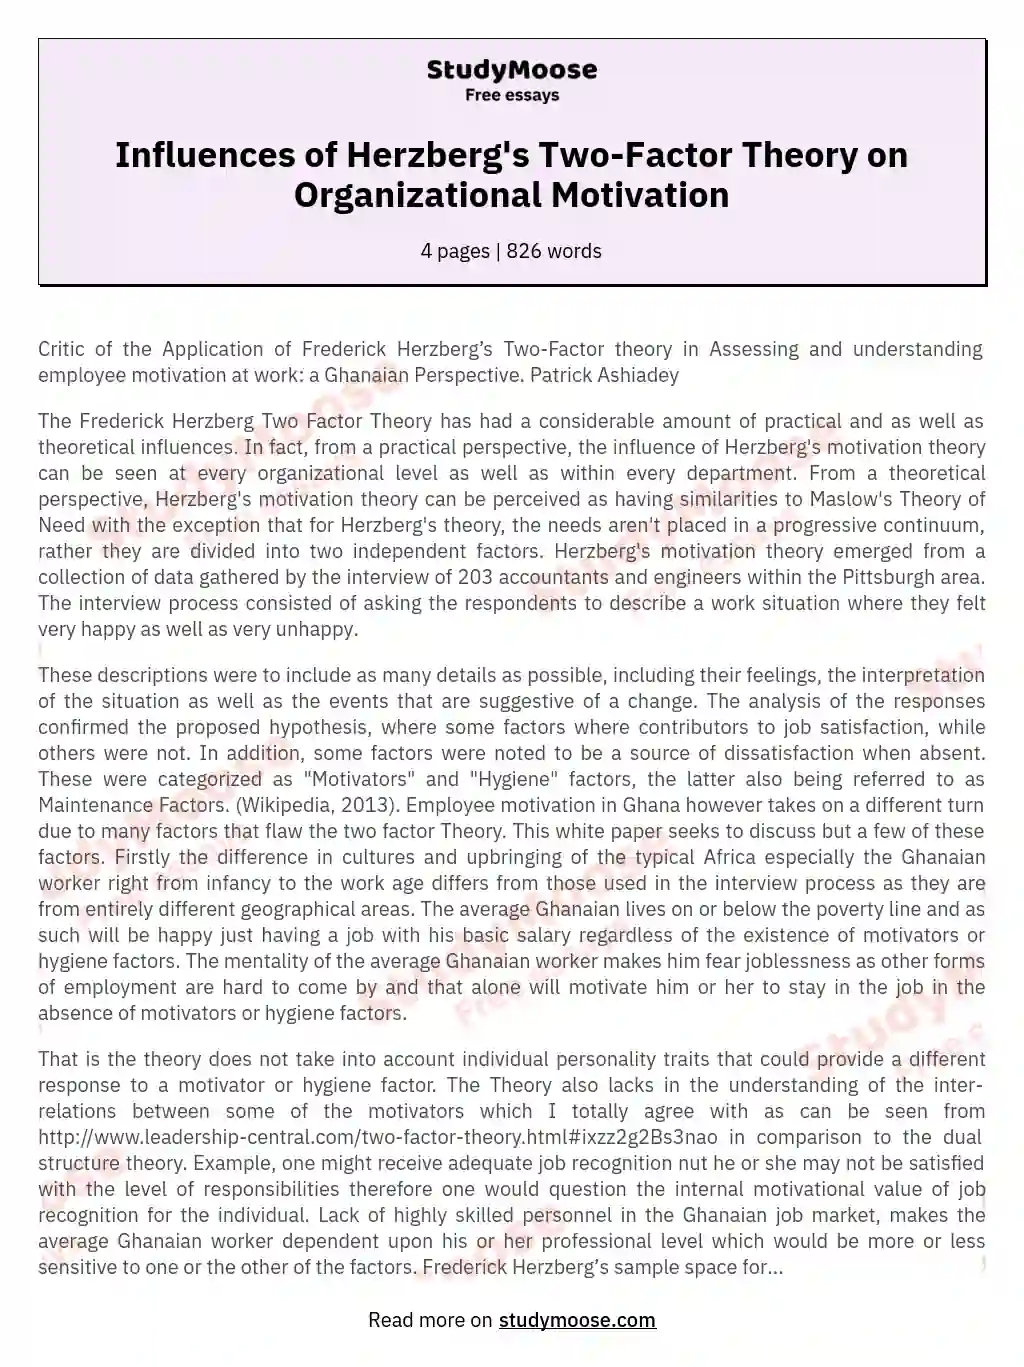 Critic of the Application of Frederick Herzberg’s Two-Factor theory in Assessing and understanding employee motivation at work: a Ghanaian Perspective